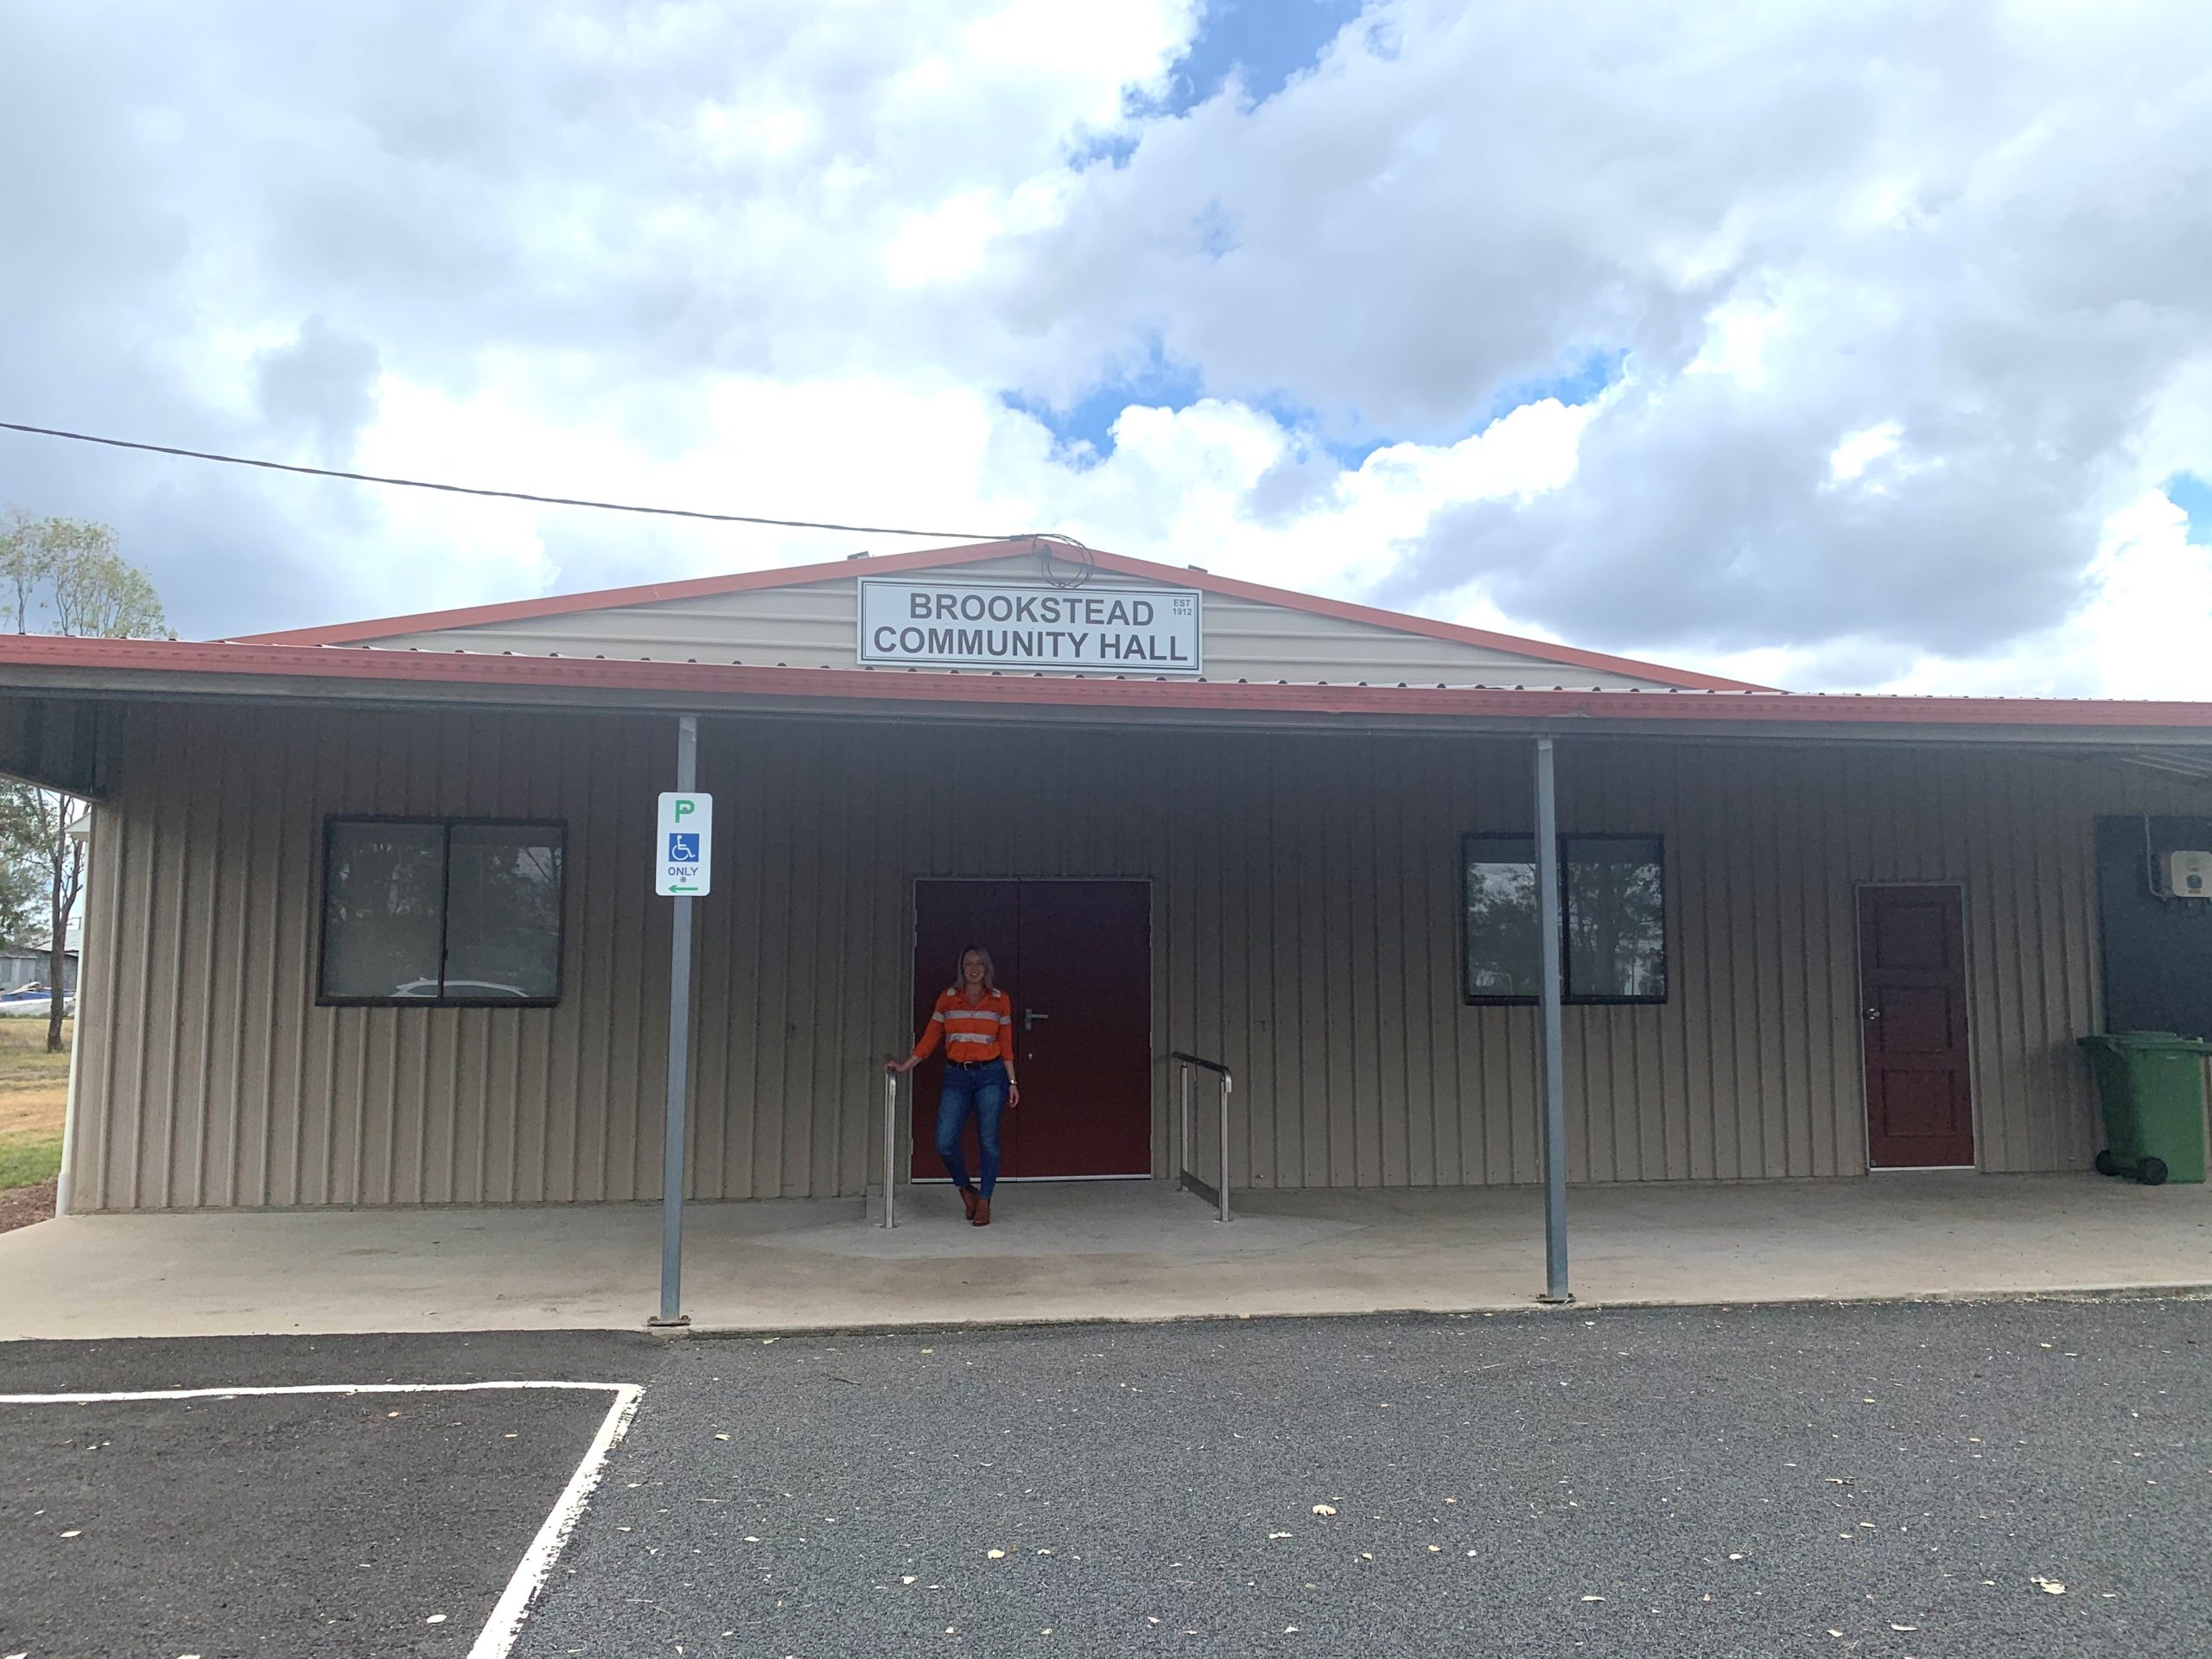 Brookstead Community Hall’s new sign purchased through the Inland Rail Community Sponsorships and Donations program